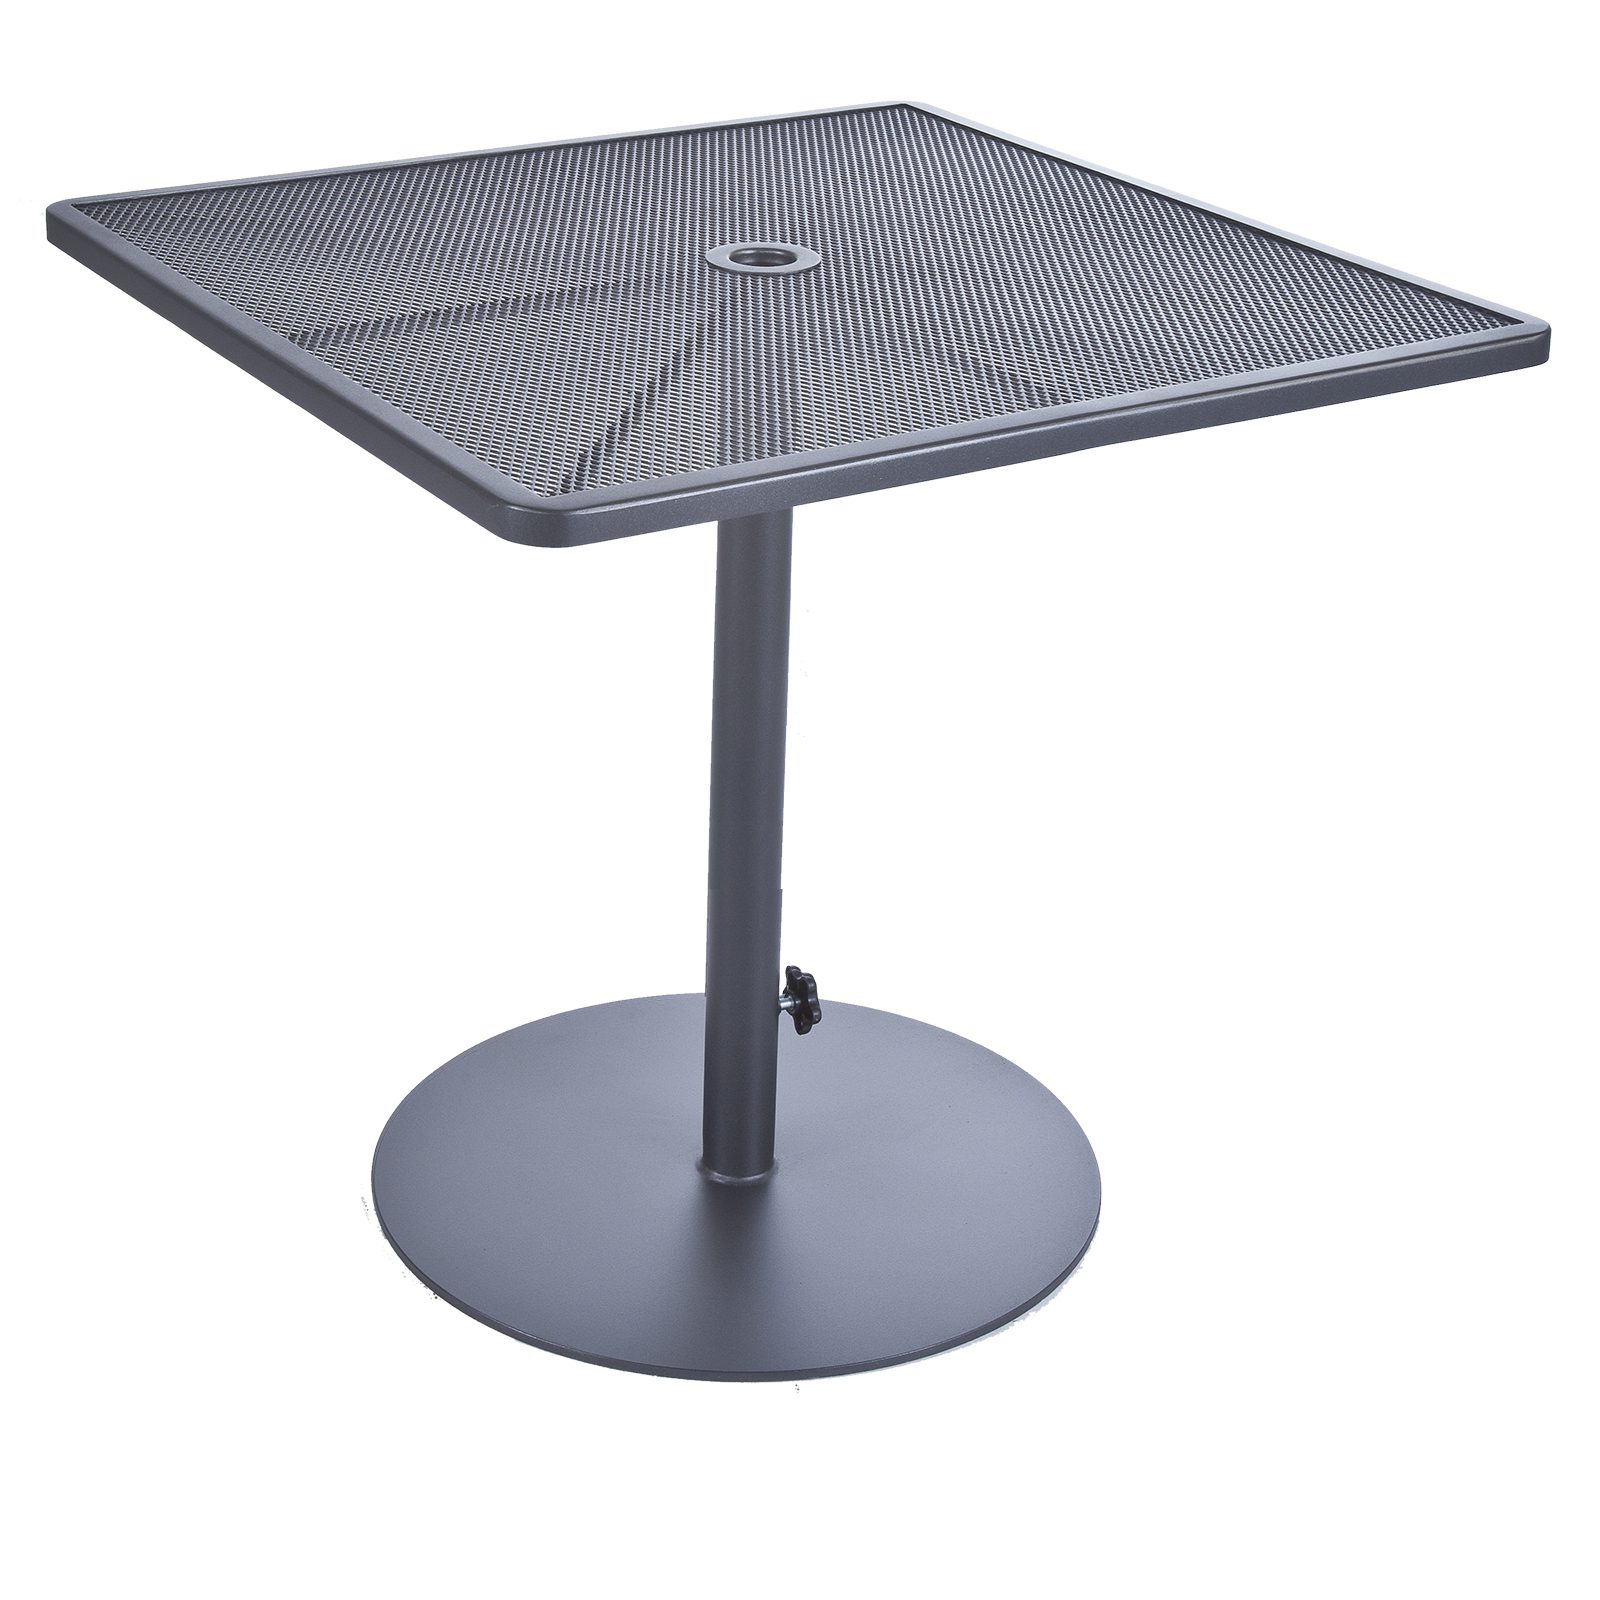 34" Sq. Pedestal Counter Table - Fully Welded Tables - Pedestal Iron Tables 112